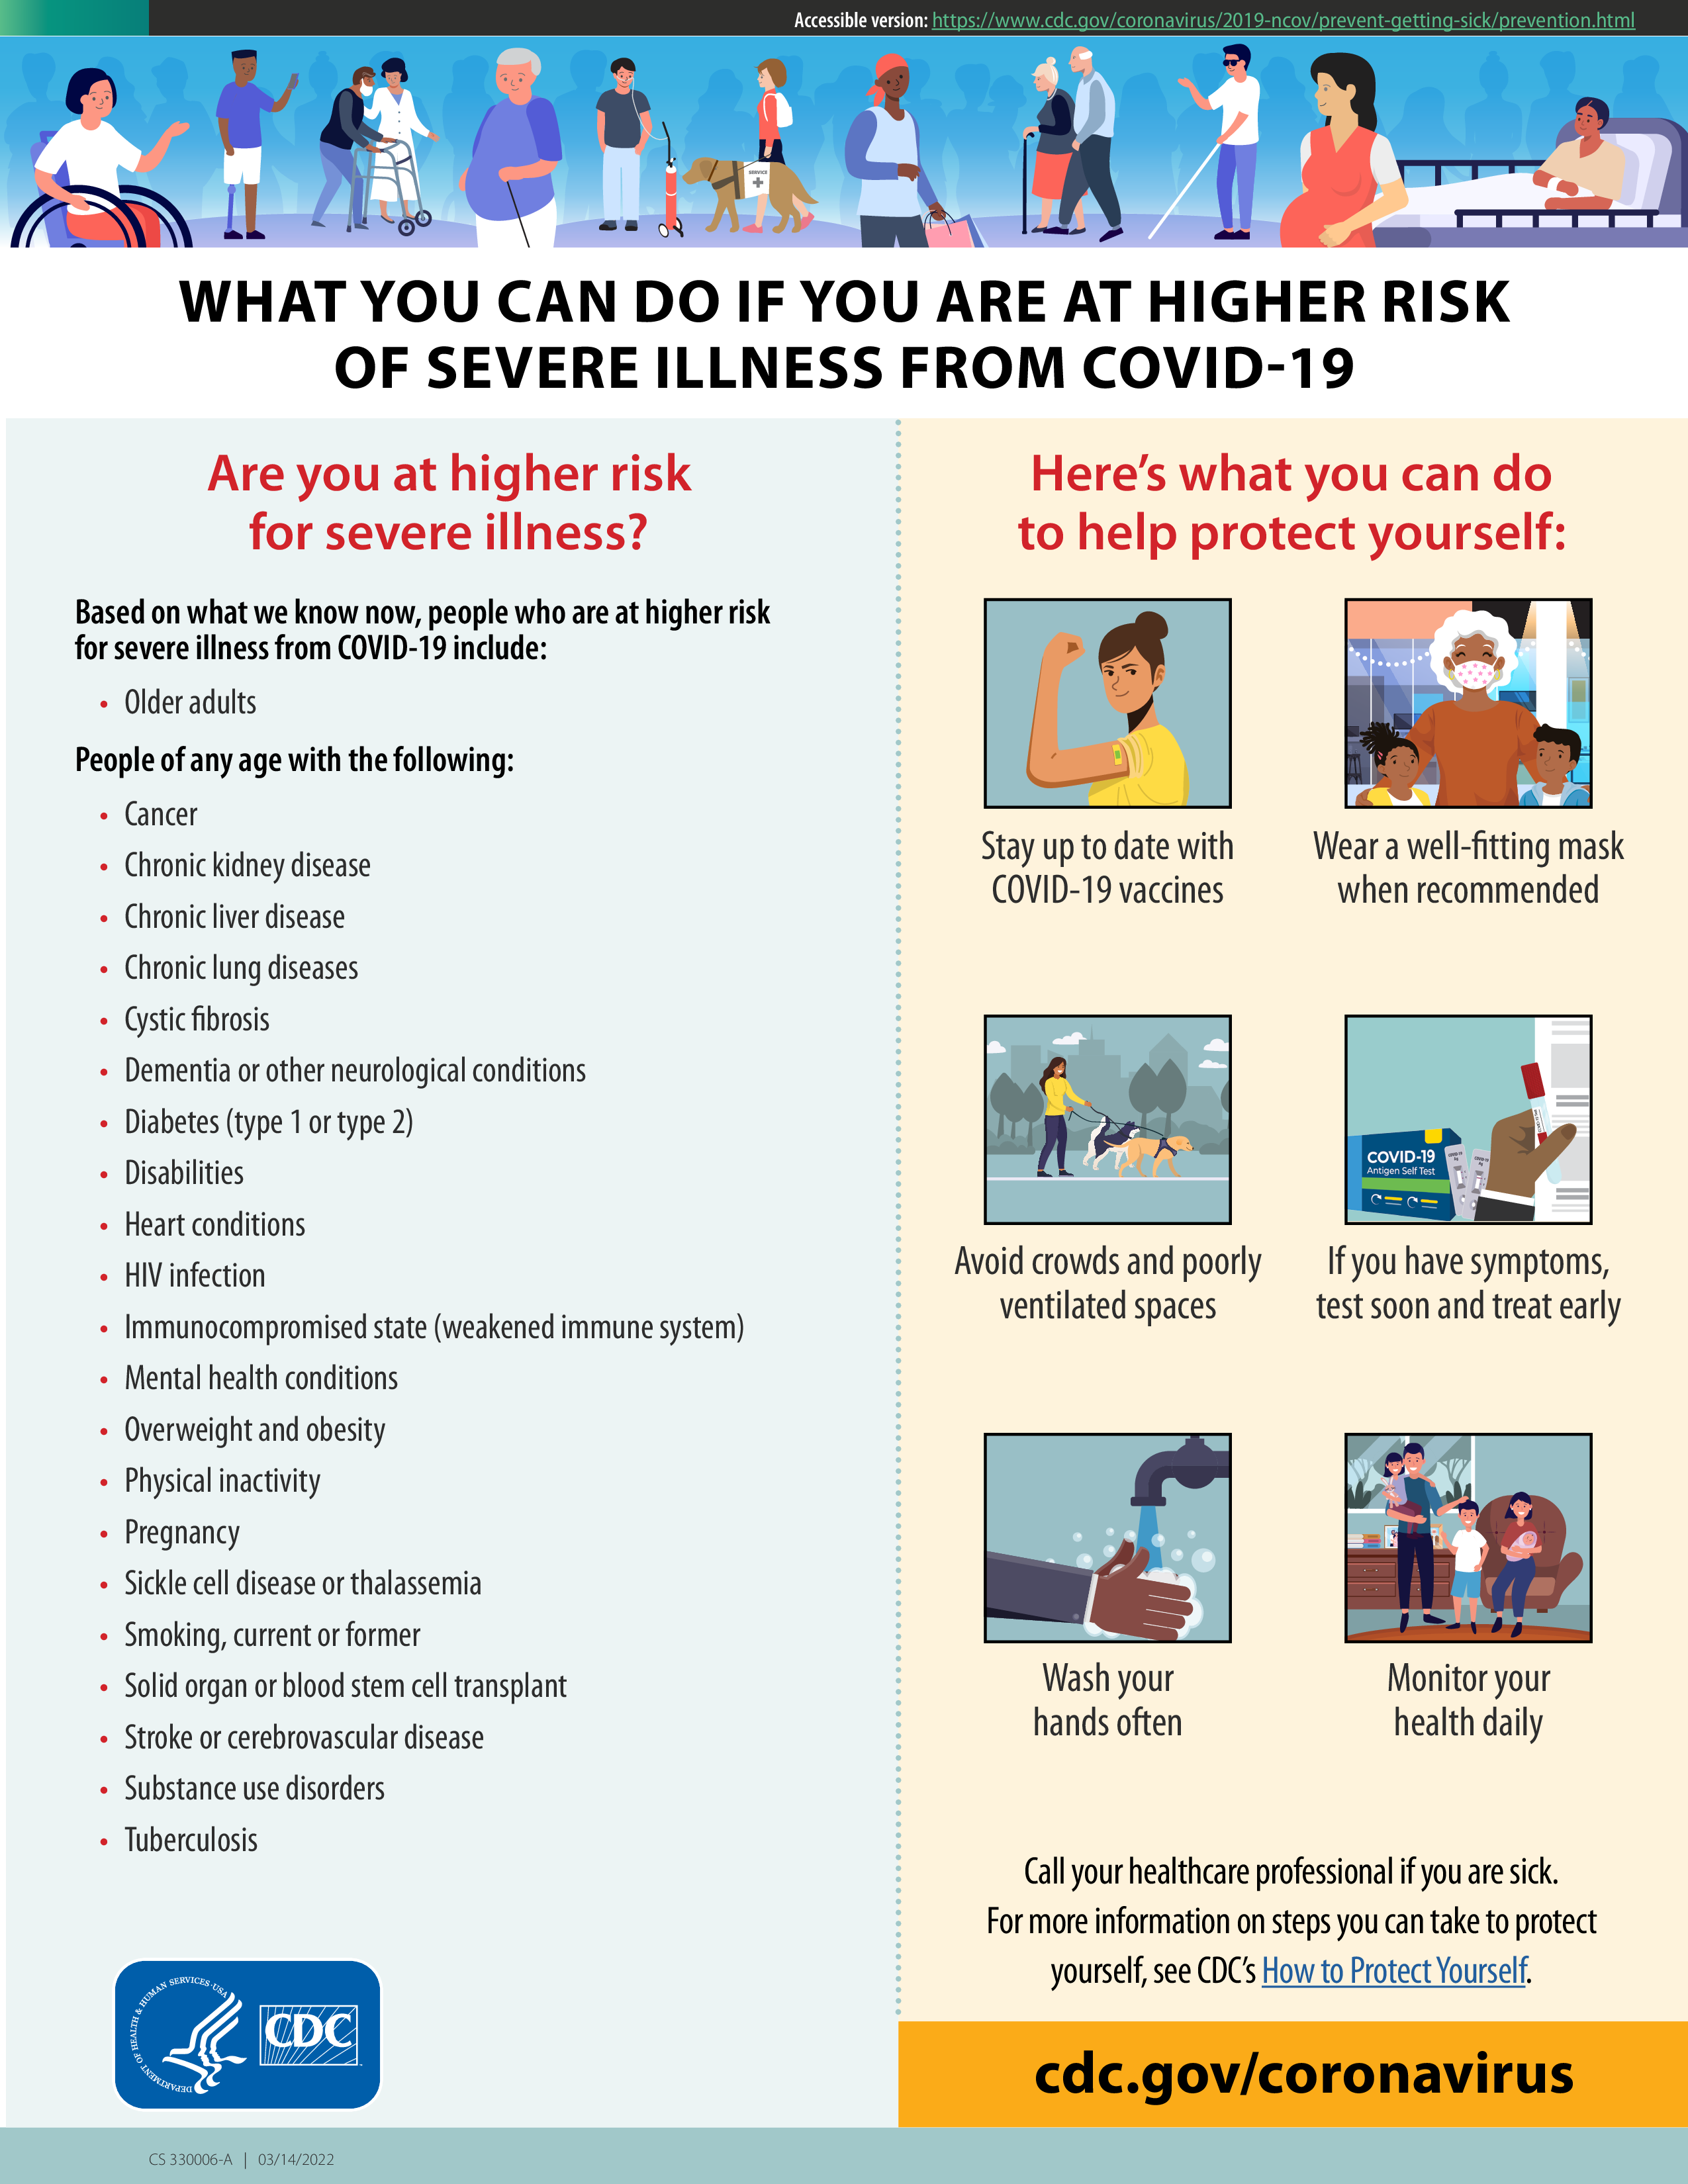 Factsheet from the CDC titled WHAT YOU CAN DO IF YOU ARE AT HIGHER RISK OF SEVERE ILLNESS FROM COVID-19